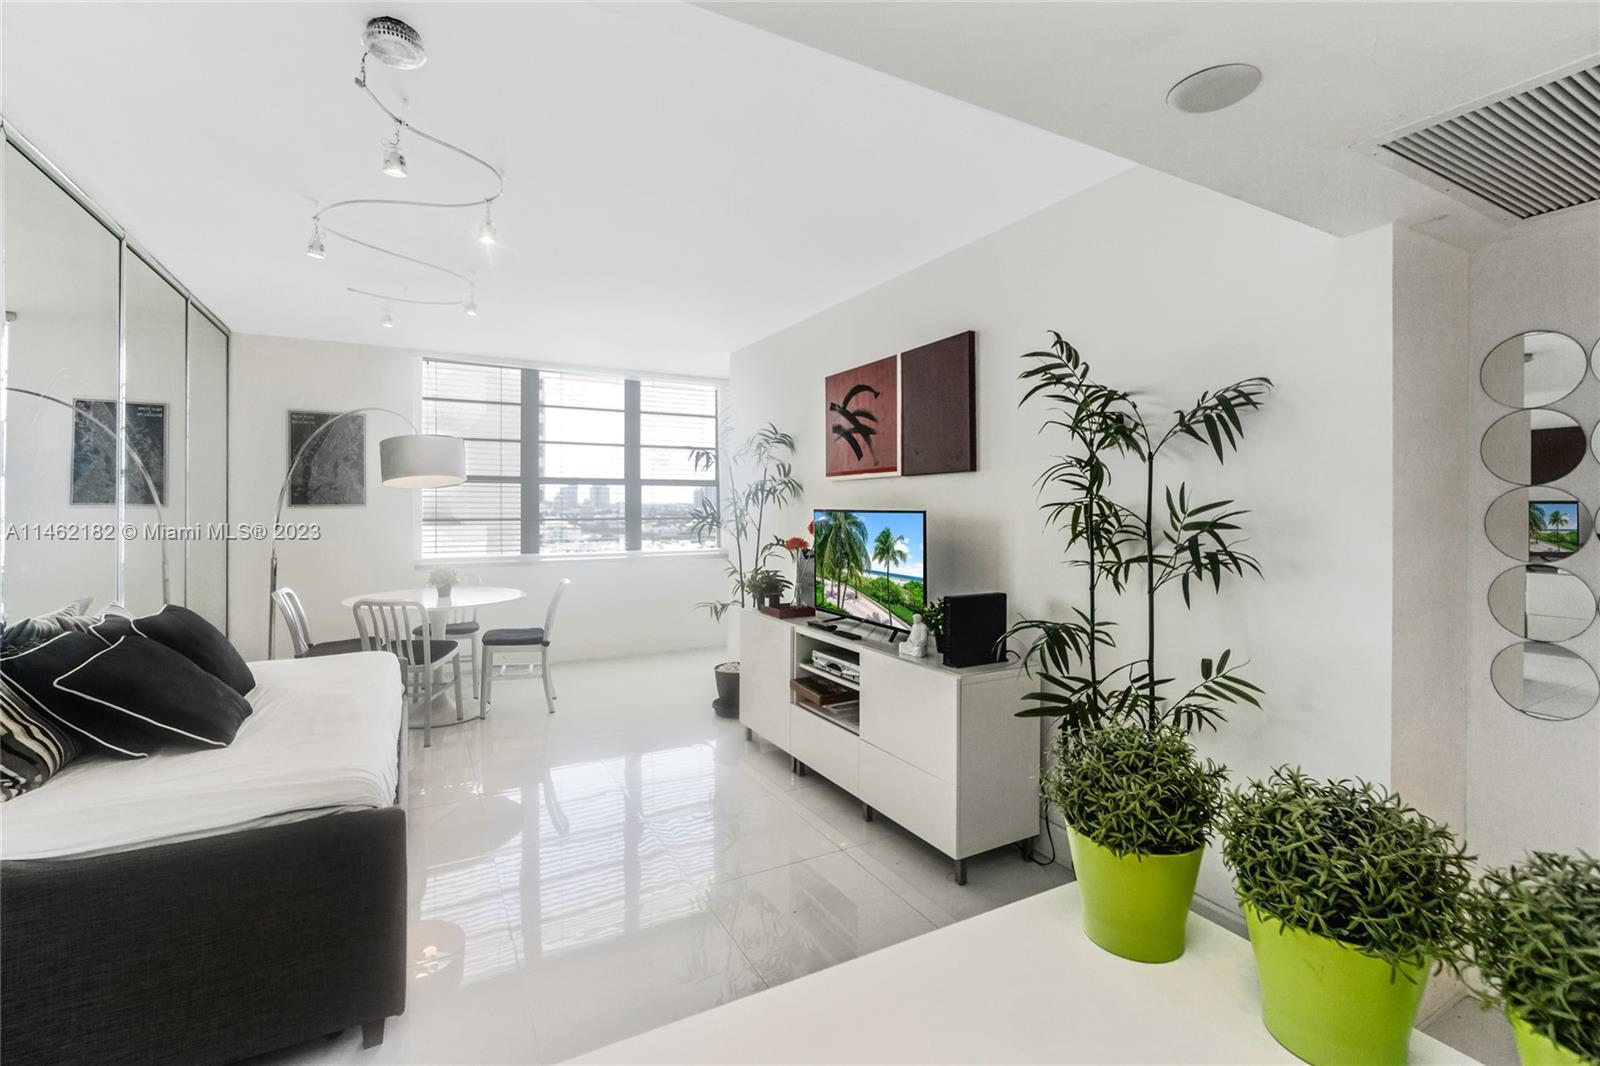 Renovated Jr. 1Bed apartment at 100 Lincoln Rd, Miami Beach, the unit can be rented 12 times per yea